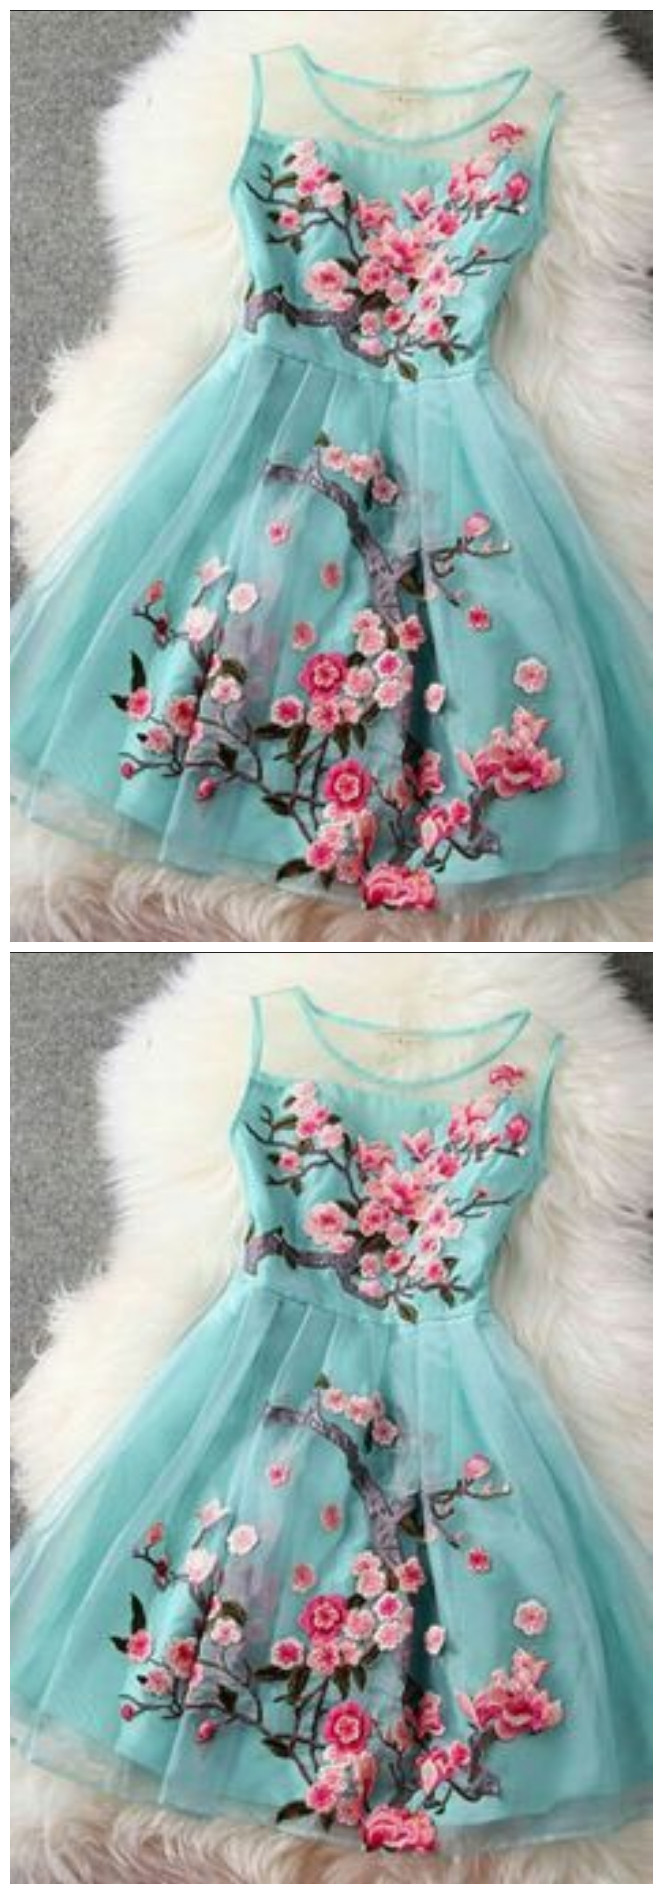 Embroidery, Flower ,organza, Party Dress ,embroidery, Prom Dress,party Dress ,graduation Dress,sweet Dresses